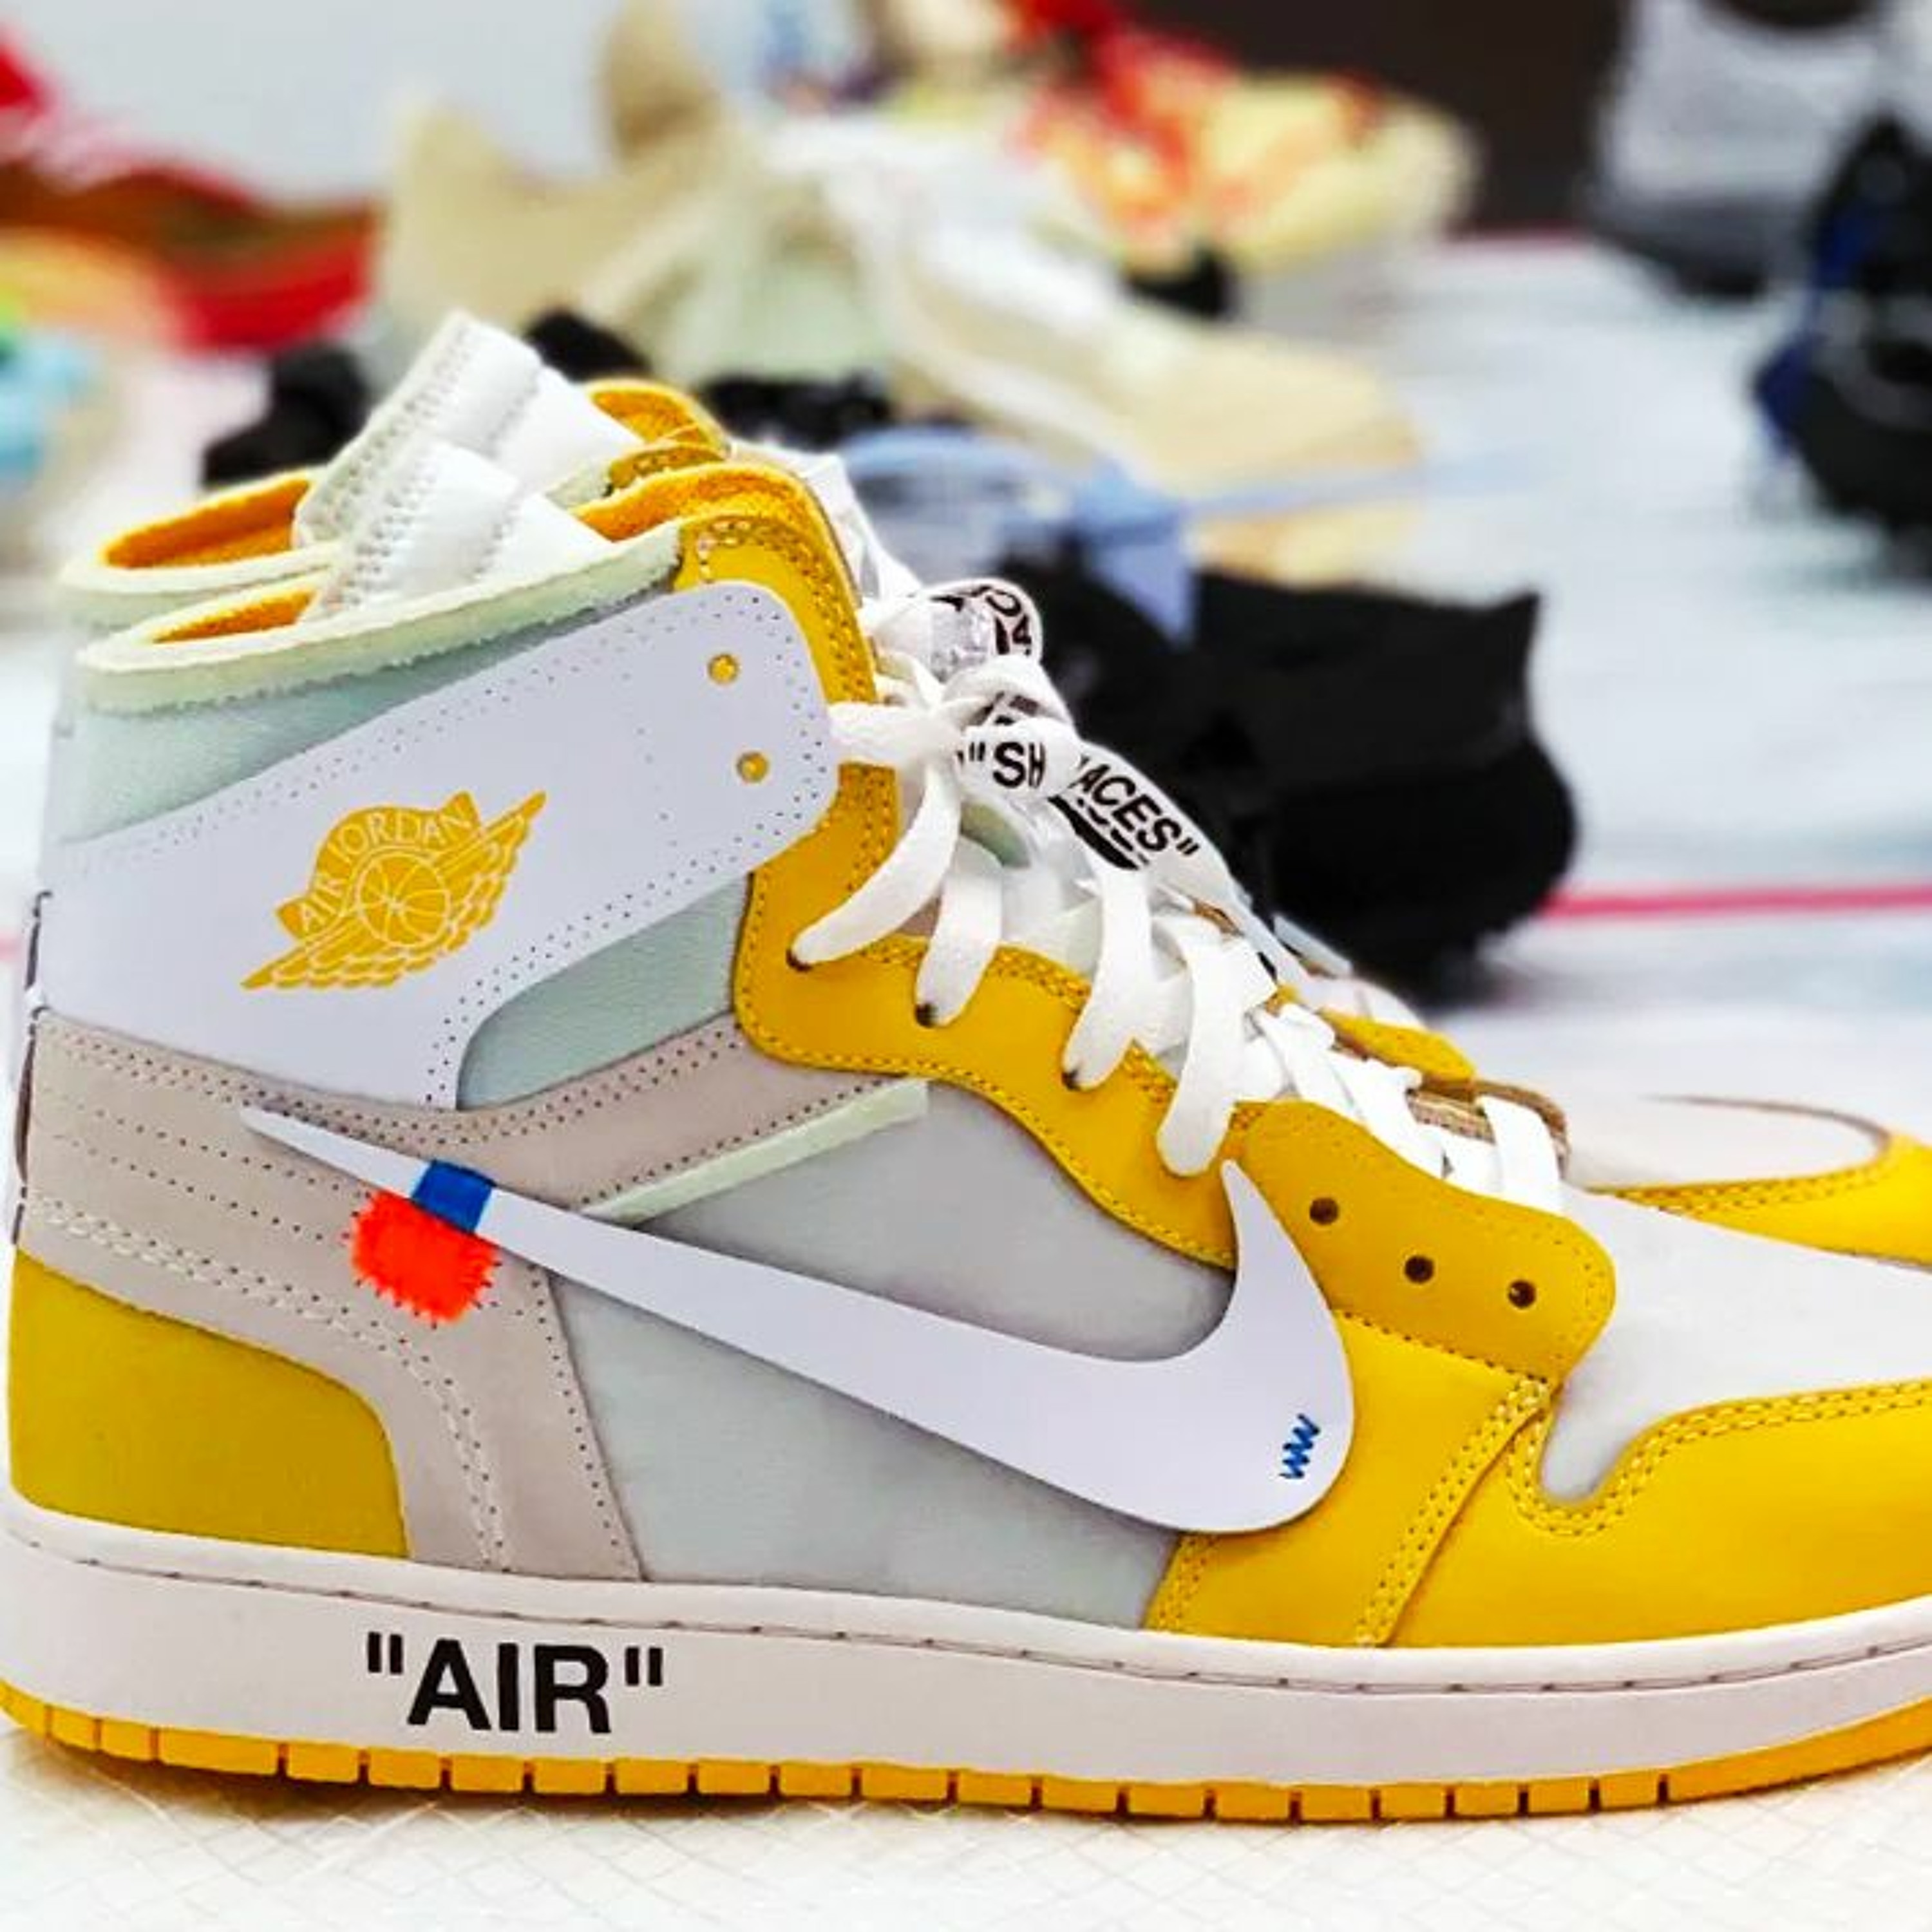 Off-White, Dior, CNY, Paris & More Limited Edition Air Jordan Releases ...